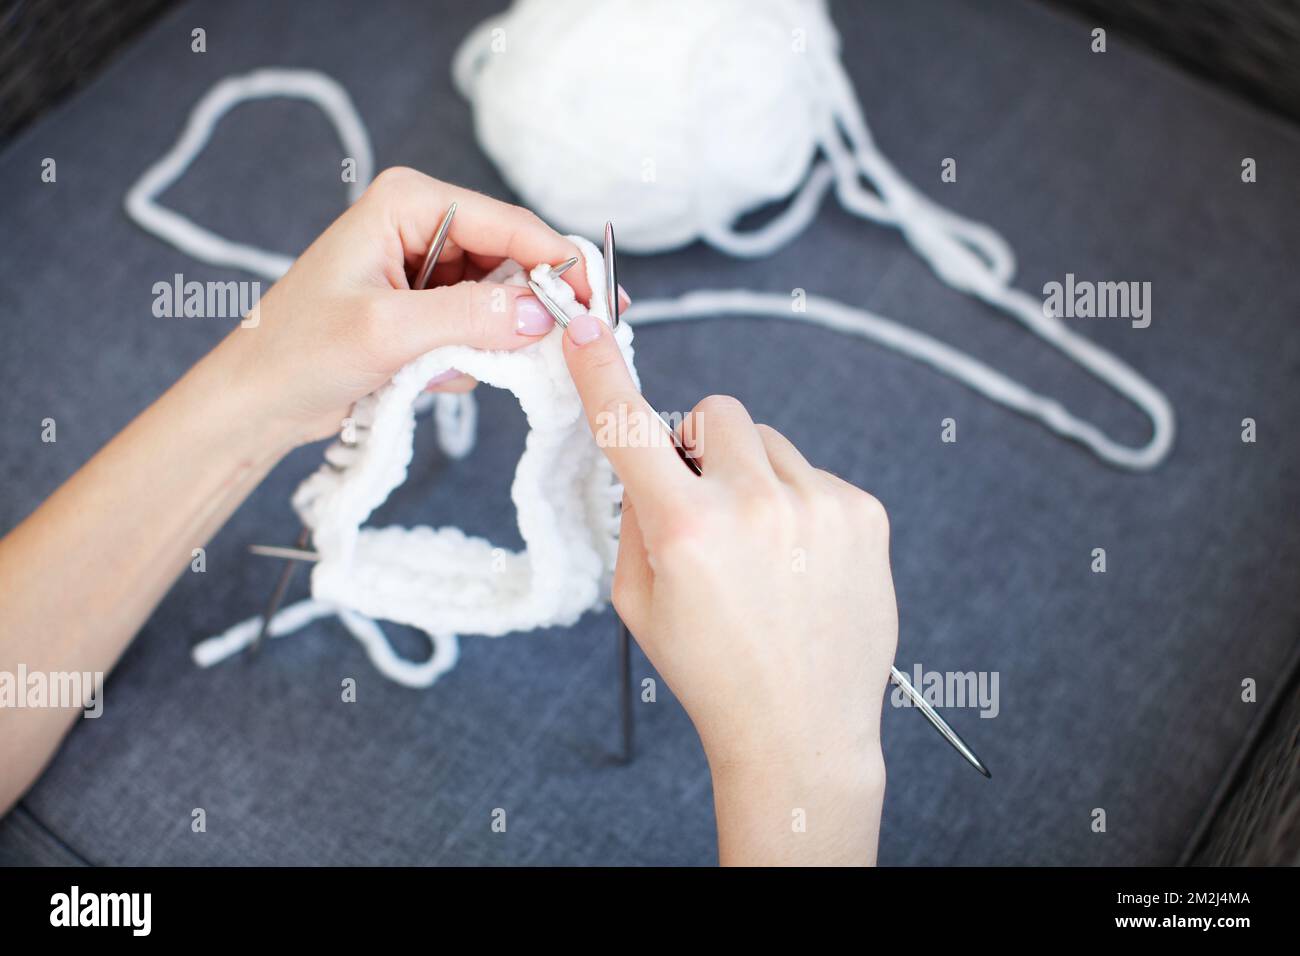 Woman hands knit white thread on circular knitting needles, dark blue blurred background. Crafting and handmade Stock Photo